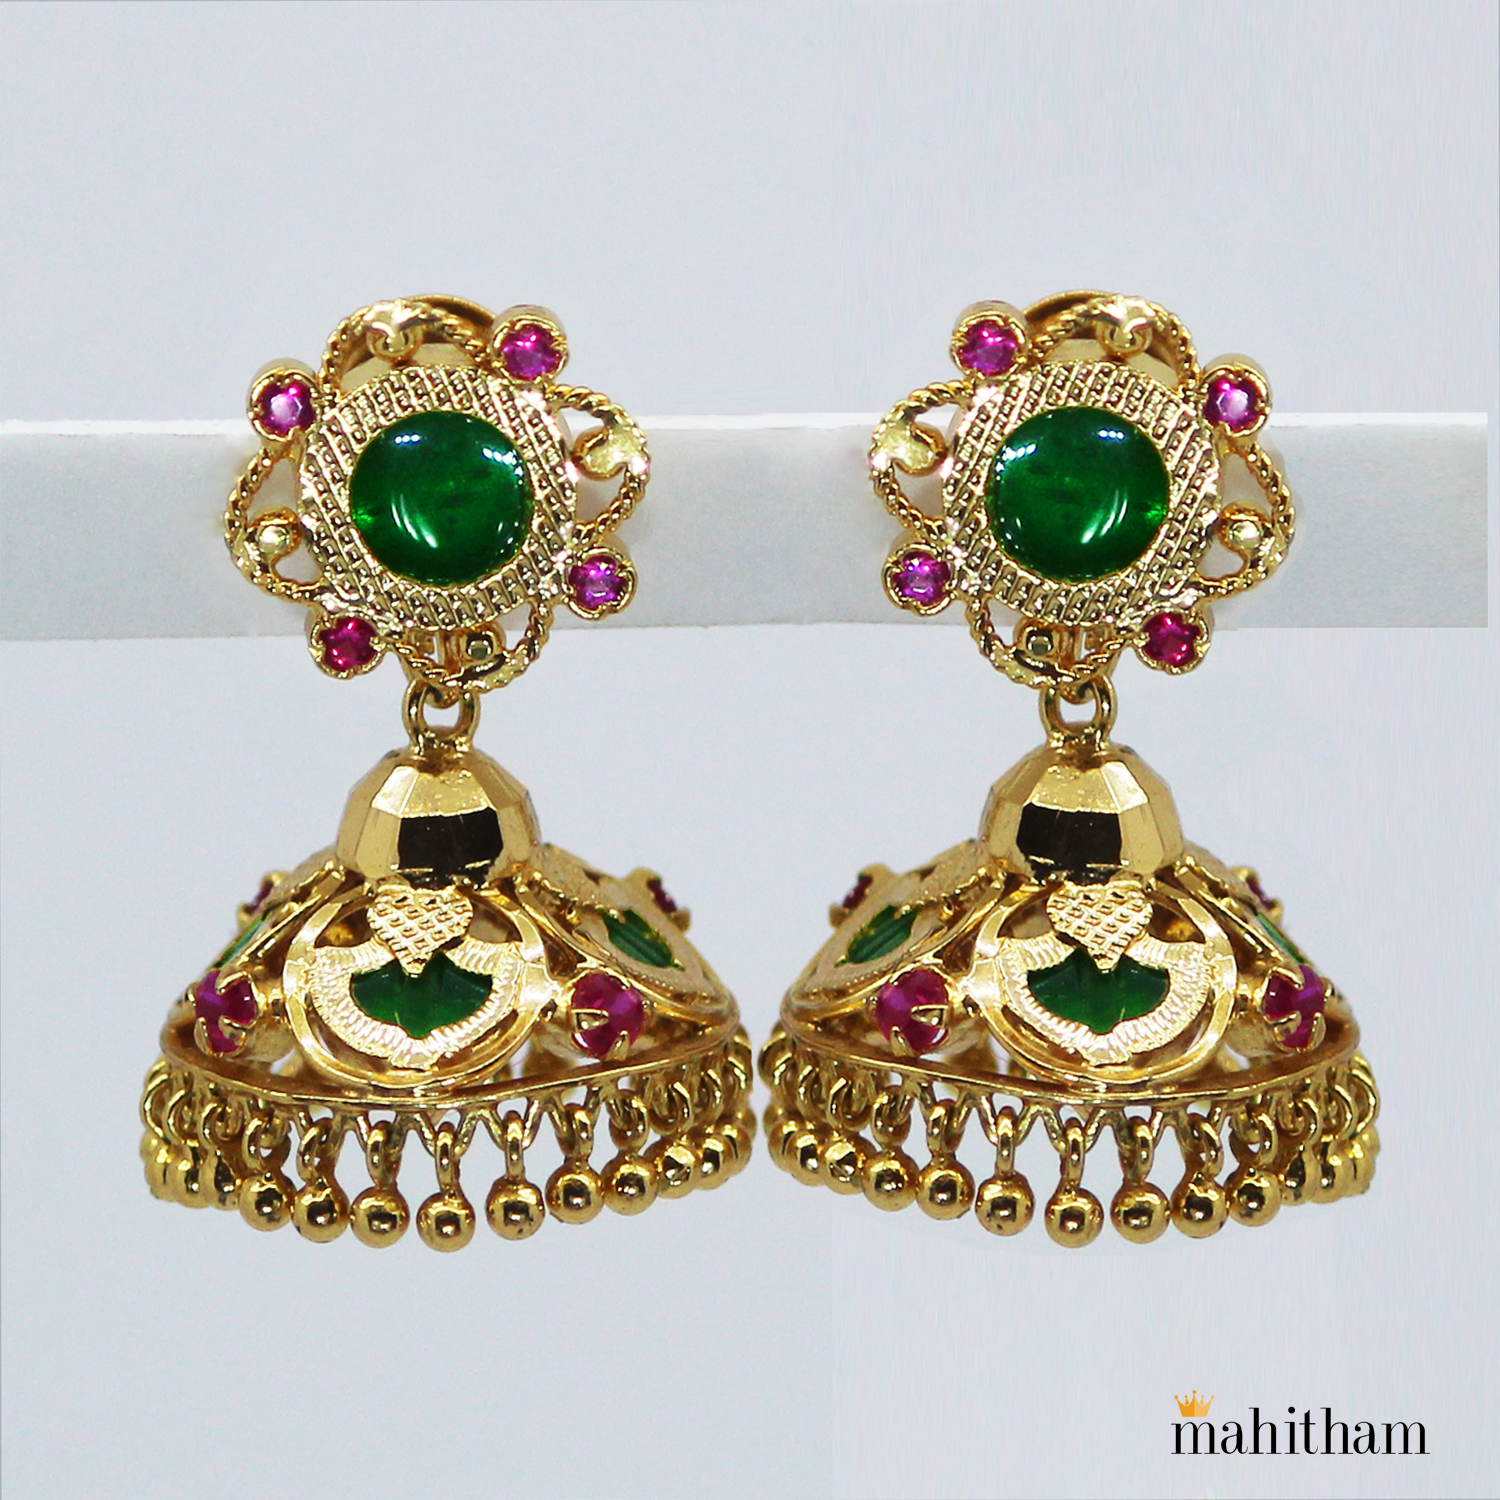 Buy Malabar Jewellery Online In India At Best Prices  Tata CLiQ